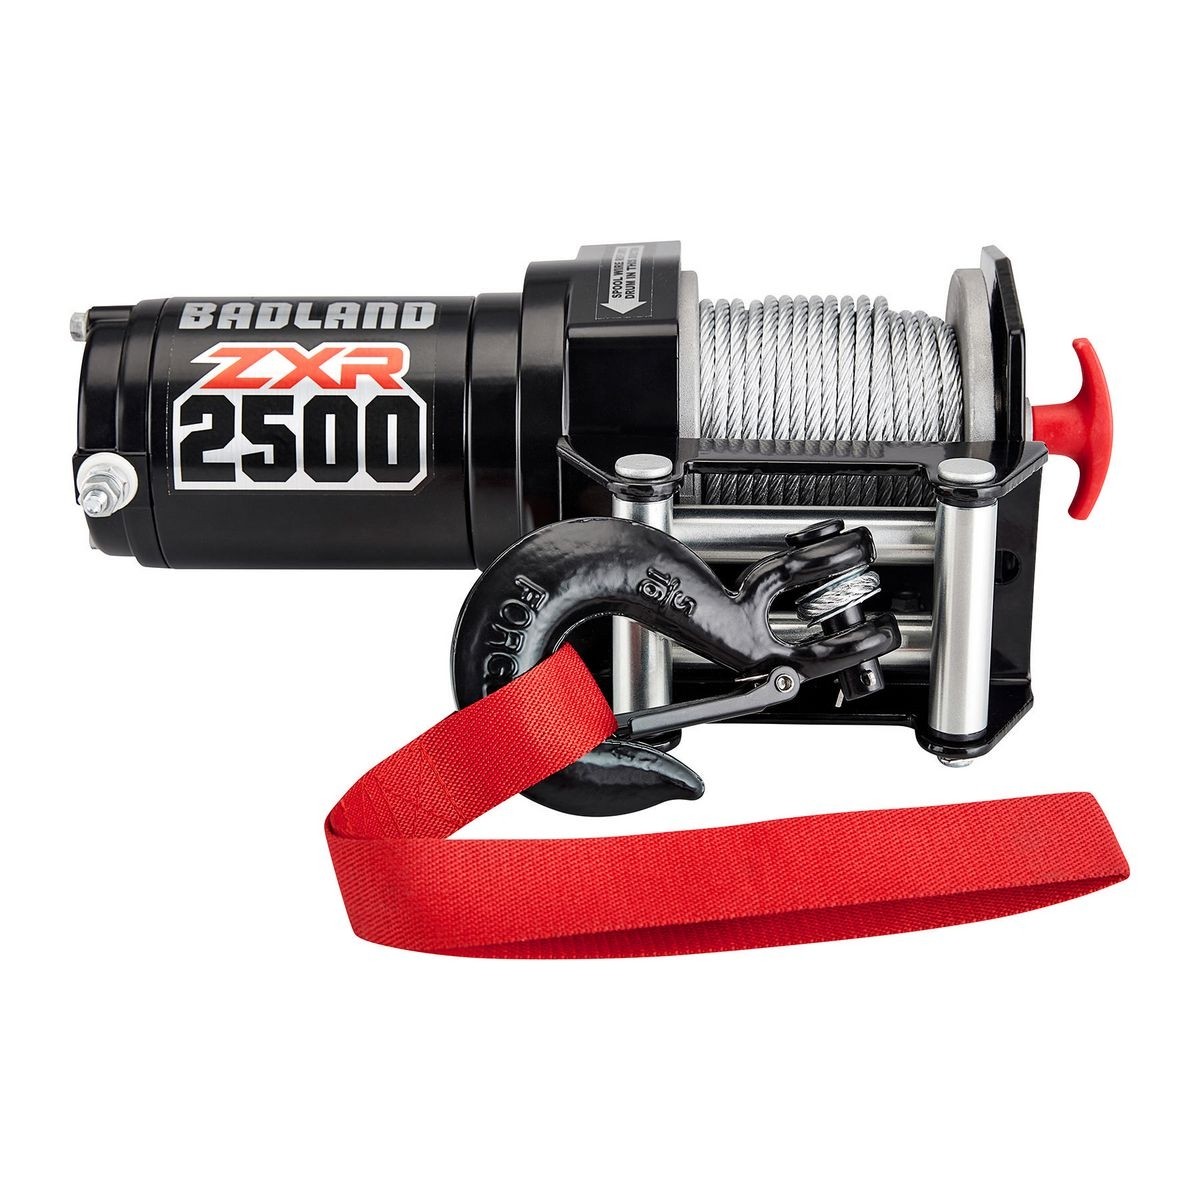 BADLAND 2500 Lb. ATV/Utility Electric Winch With Wireless Remote How To Use Badland Winch Without Remote